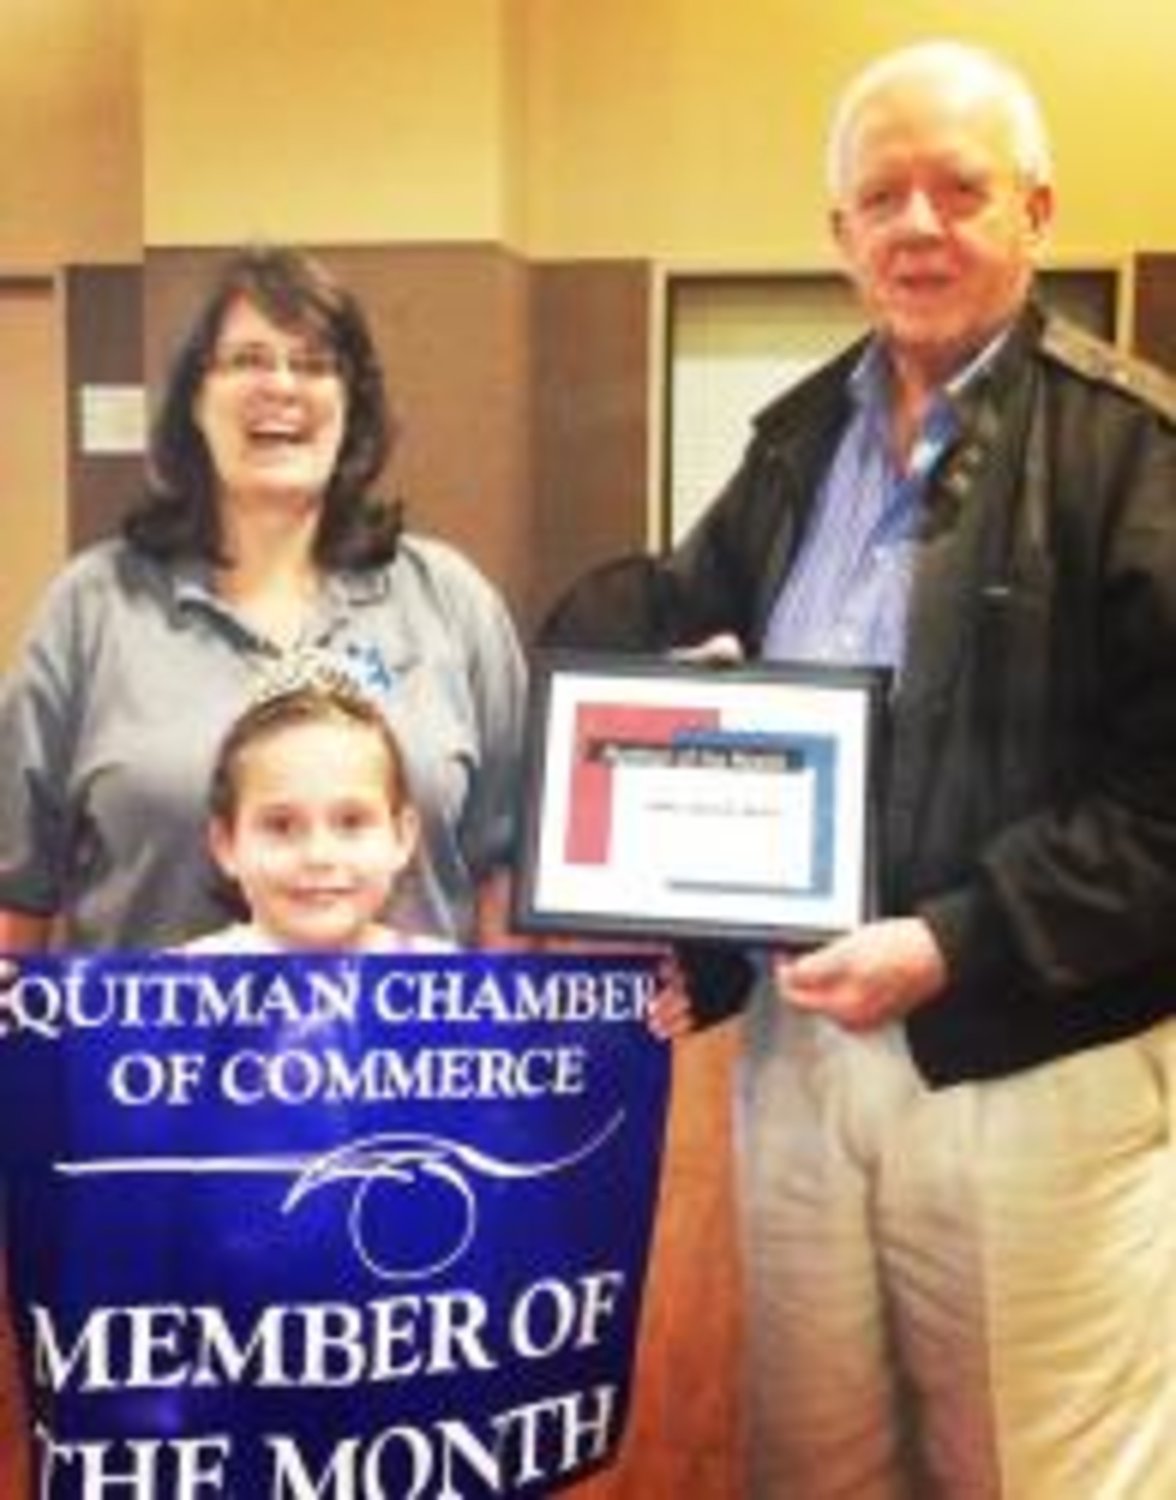 The Quitman Chamber of Commerce selected Lowe Funeral Home as their member of the month. Dary Steinburg, advertising and marketing representative for Lowe Funeral Home, poses with 2012 Little Miss Dogwood Queen Irelynn Felty and Robin Johnson, a director on the chamber's board.